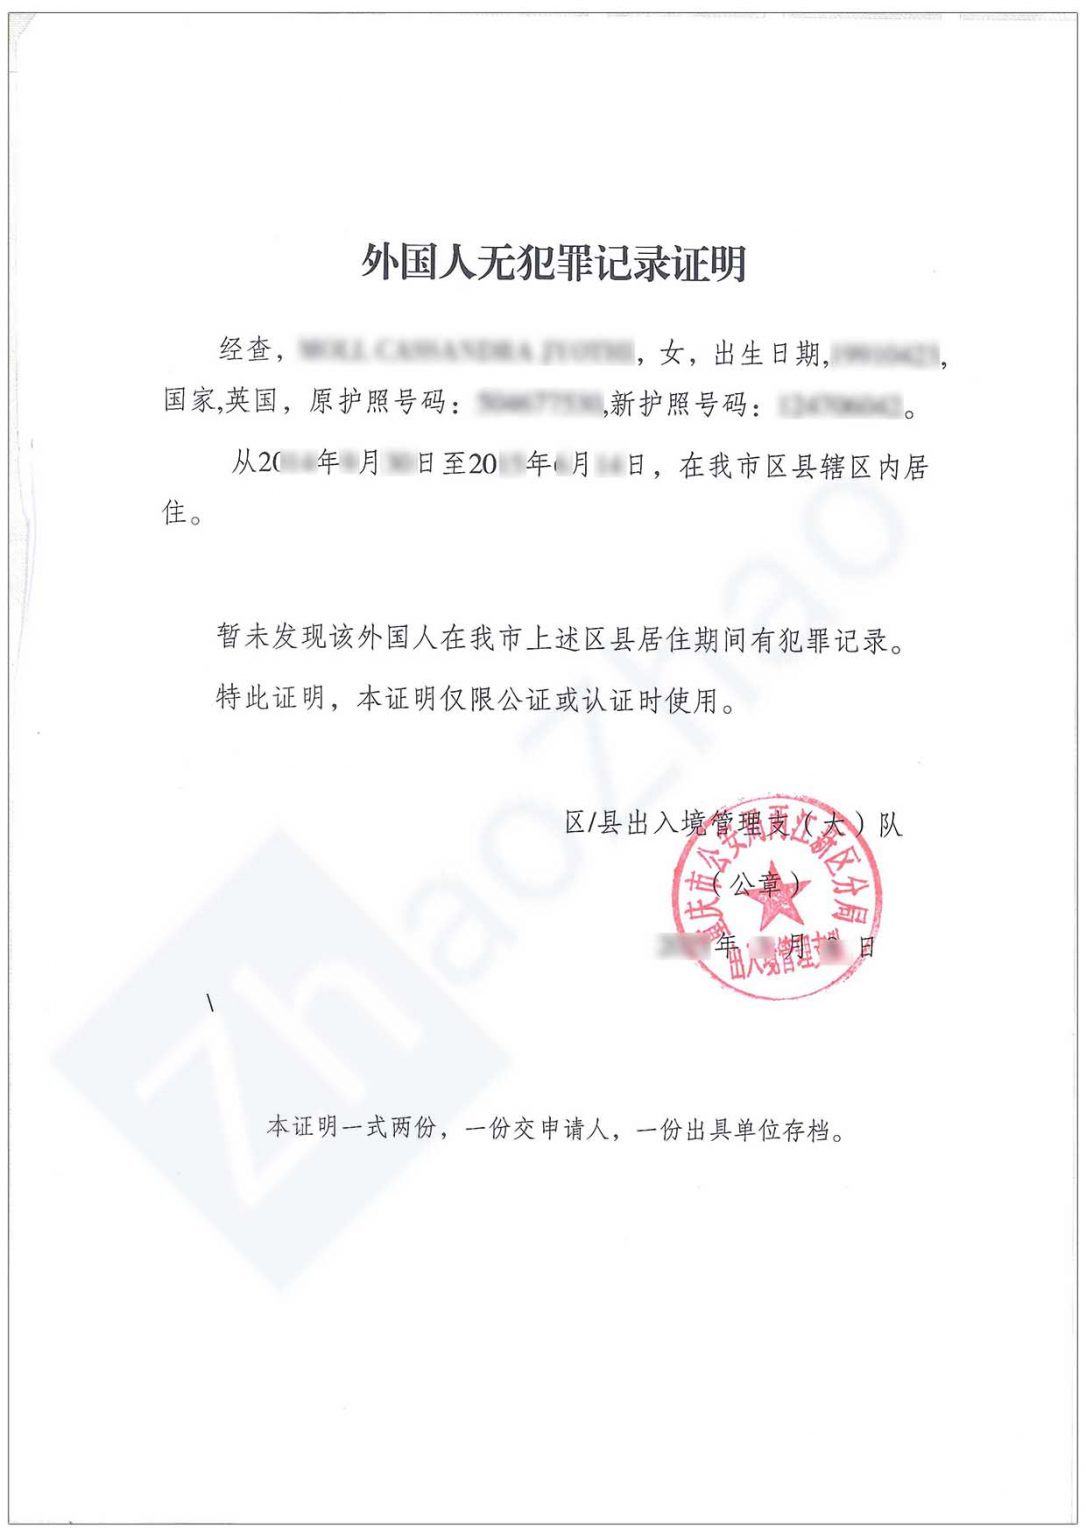 Guide For Obtaining Your Certificate Of No Criminal Record In Chongqing China Zhaozhao 1481